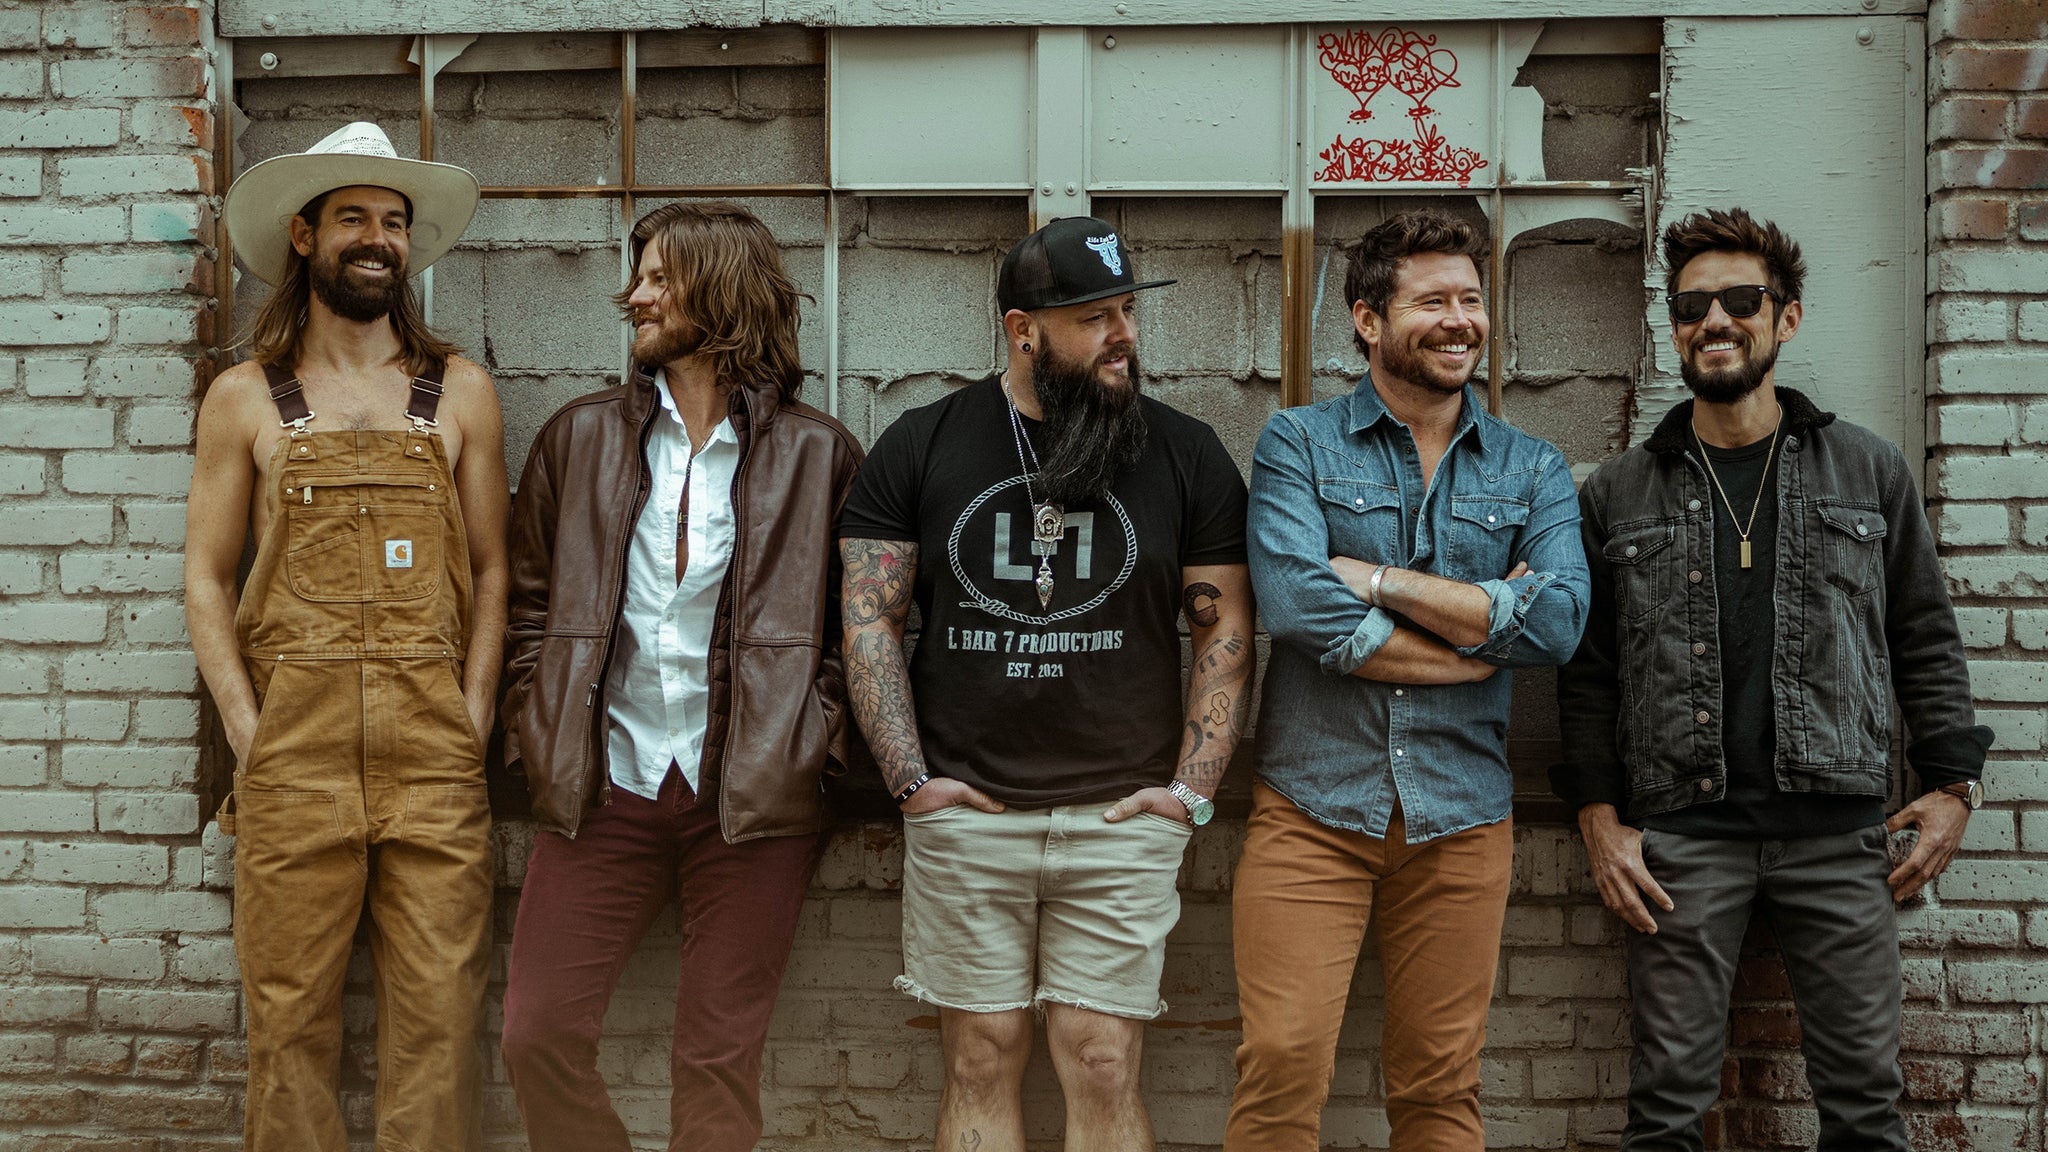 Shane Smith and the Saints in Charlottesville promo photo for Artist presale offer code